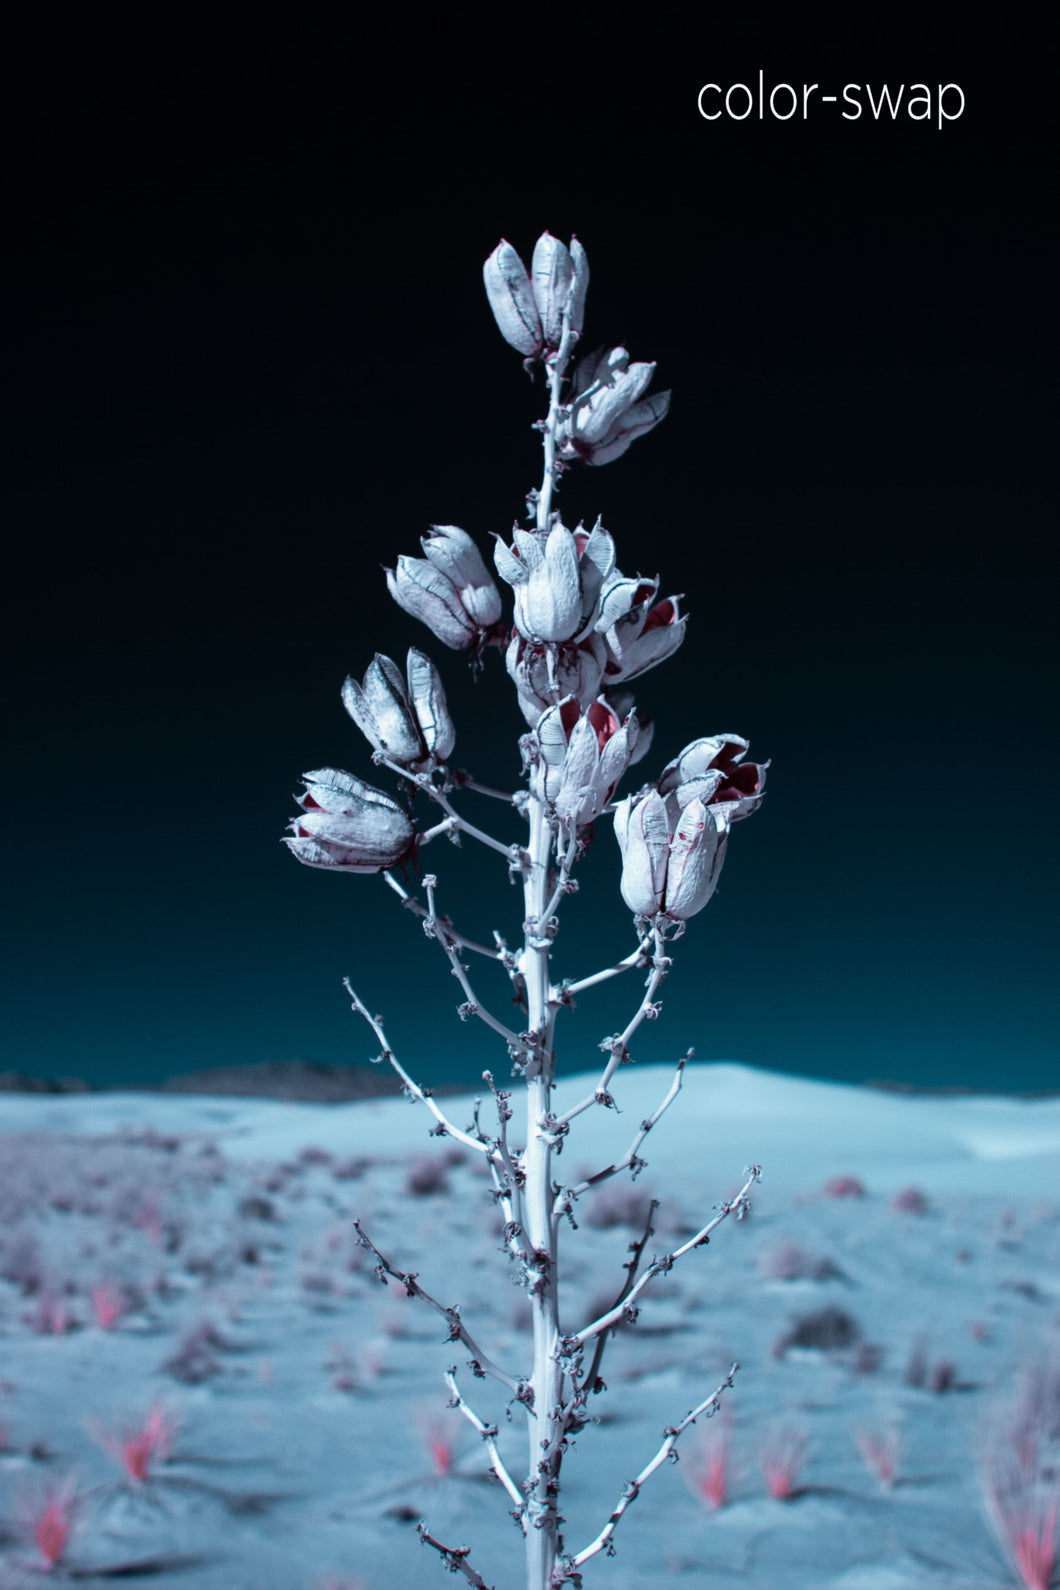 lone yucca photo, one yucca plant, budding cactus in desert, infrared nature photography, Austin photographer